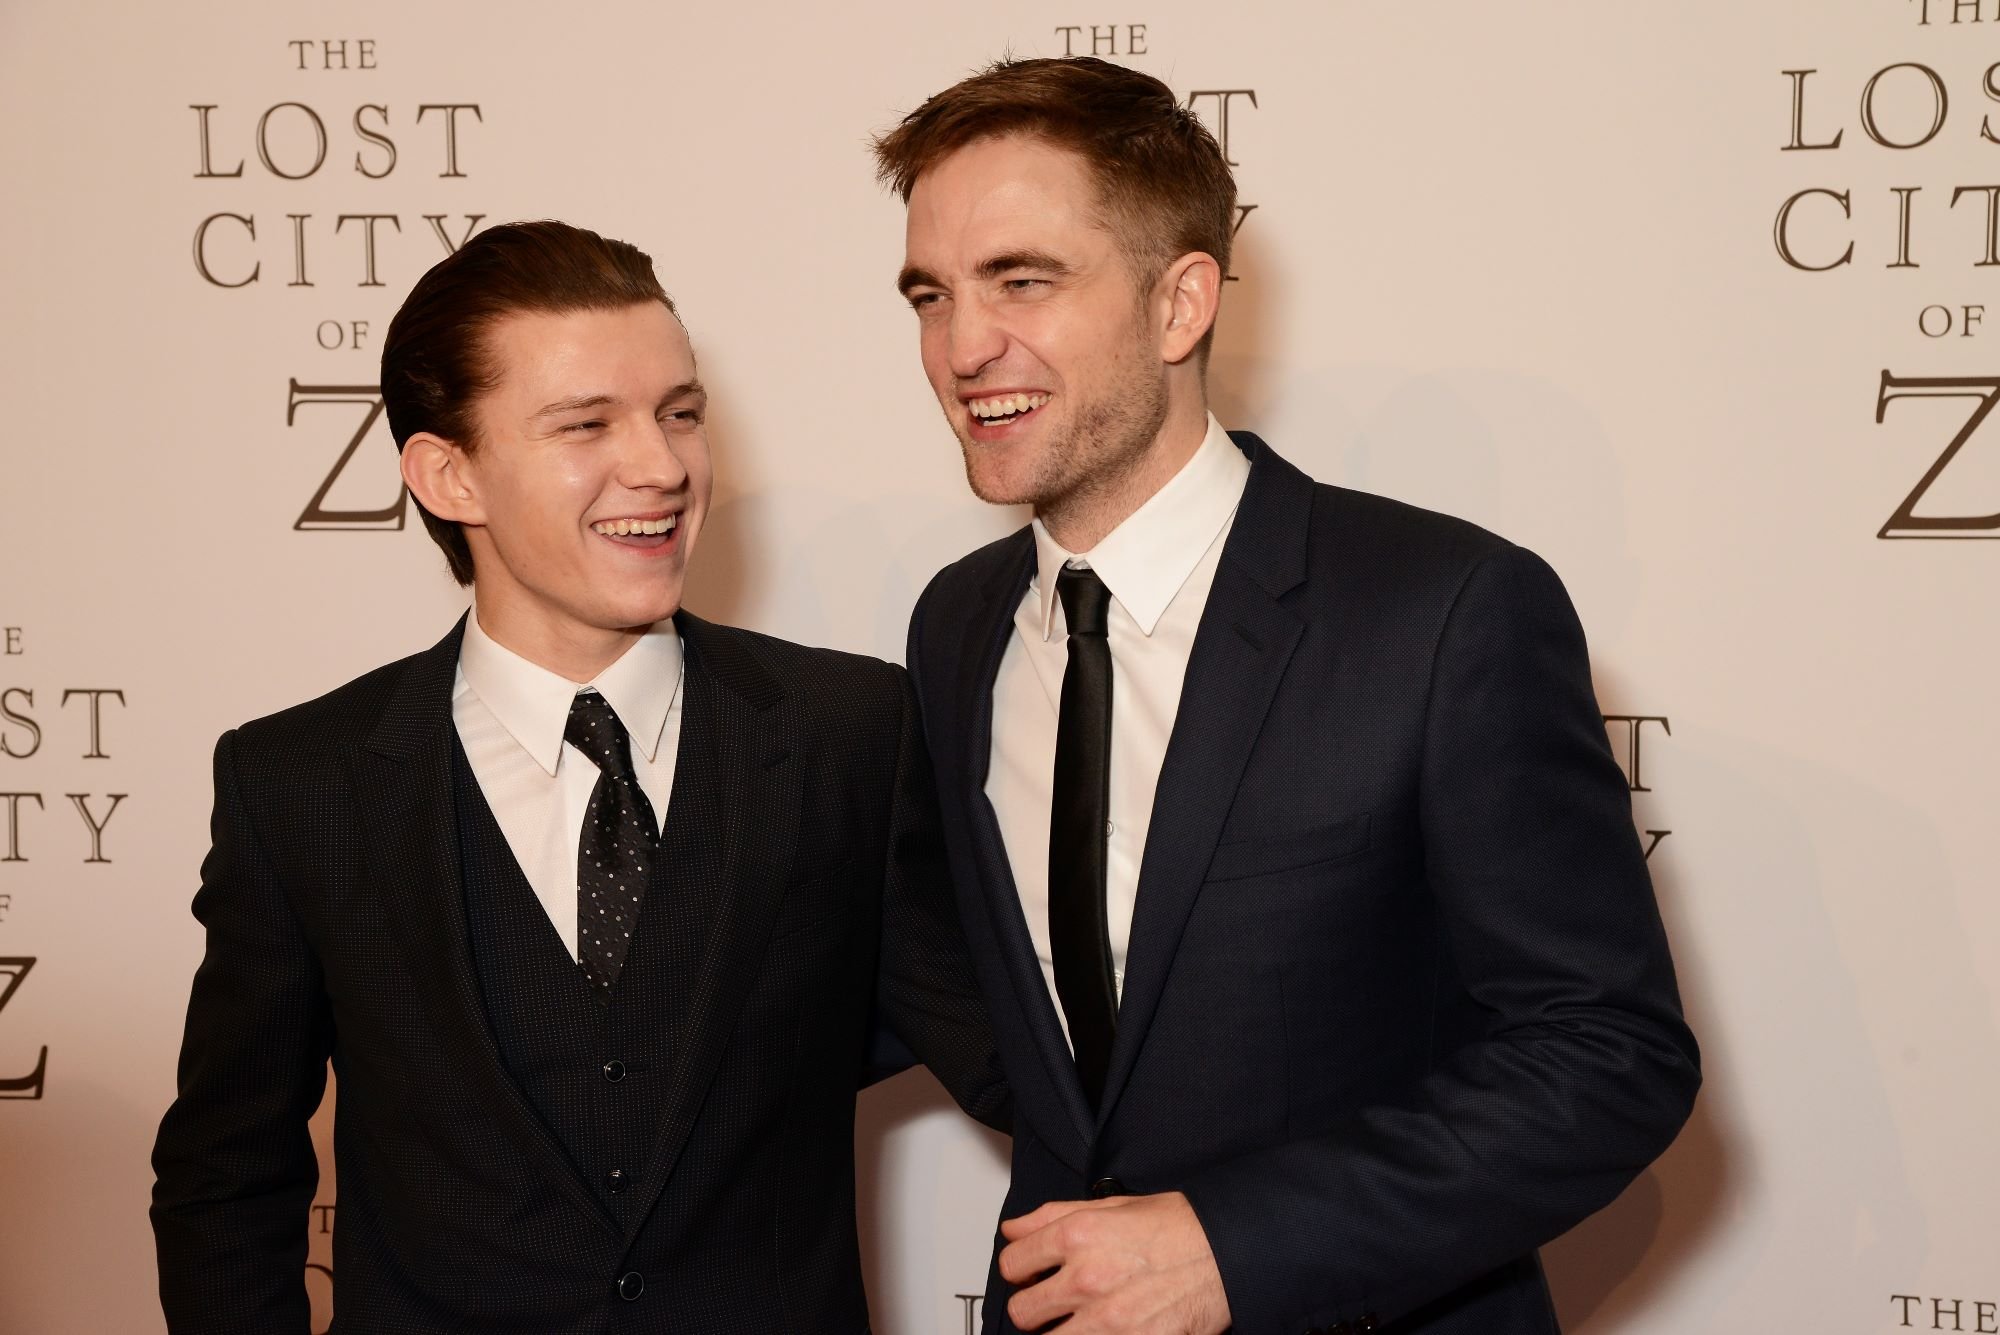 'Spider-Man: No Way Home' star Tom Holland and 'The Batman' star Robert Pattinson pose for pictures together. Holland wears a black suit over a black vest, white button-up shirt, and black tie with white polka dots. Pattinson wears a black suit over a white button-up shirt and black tie.